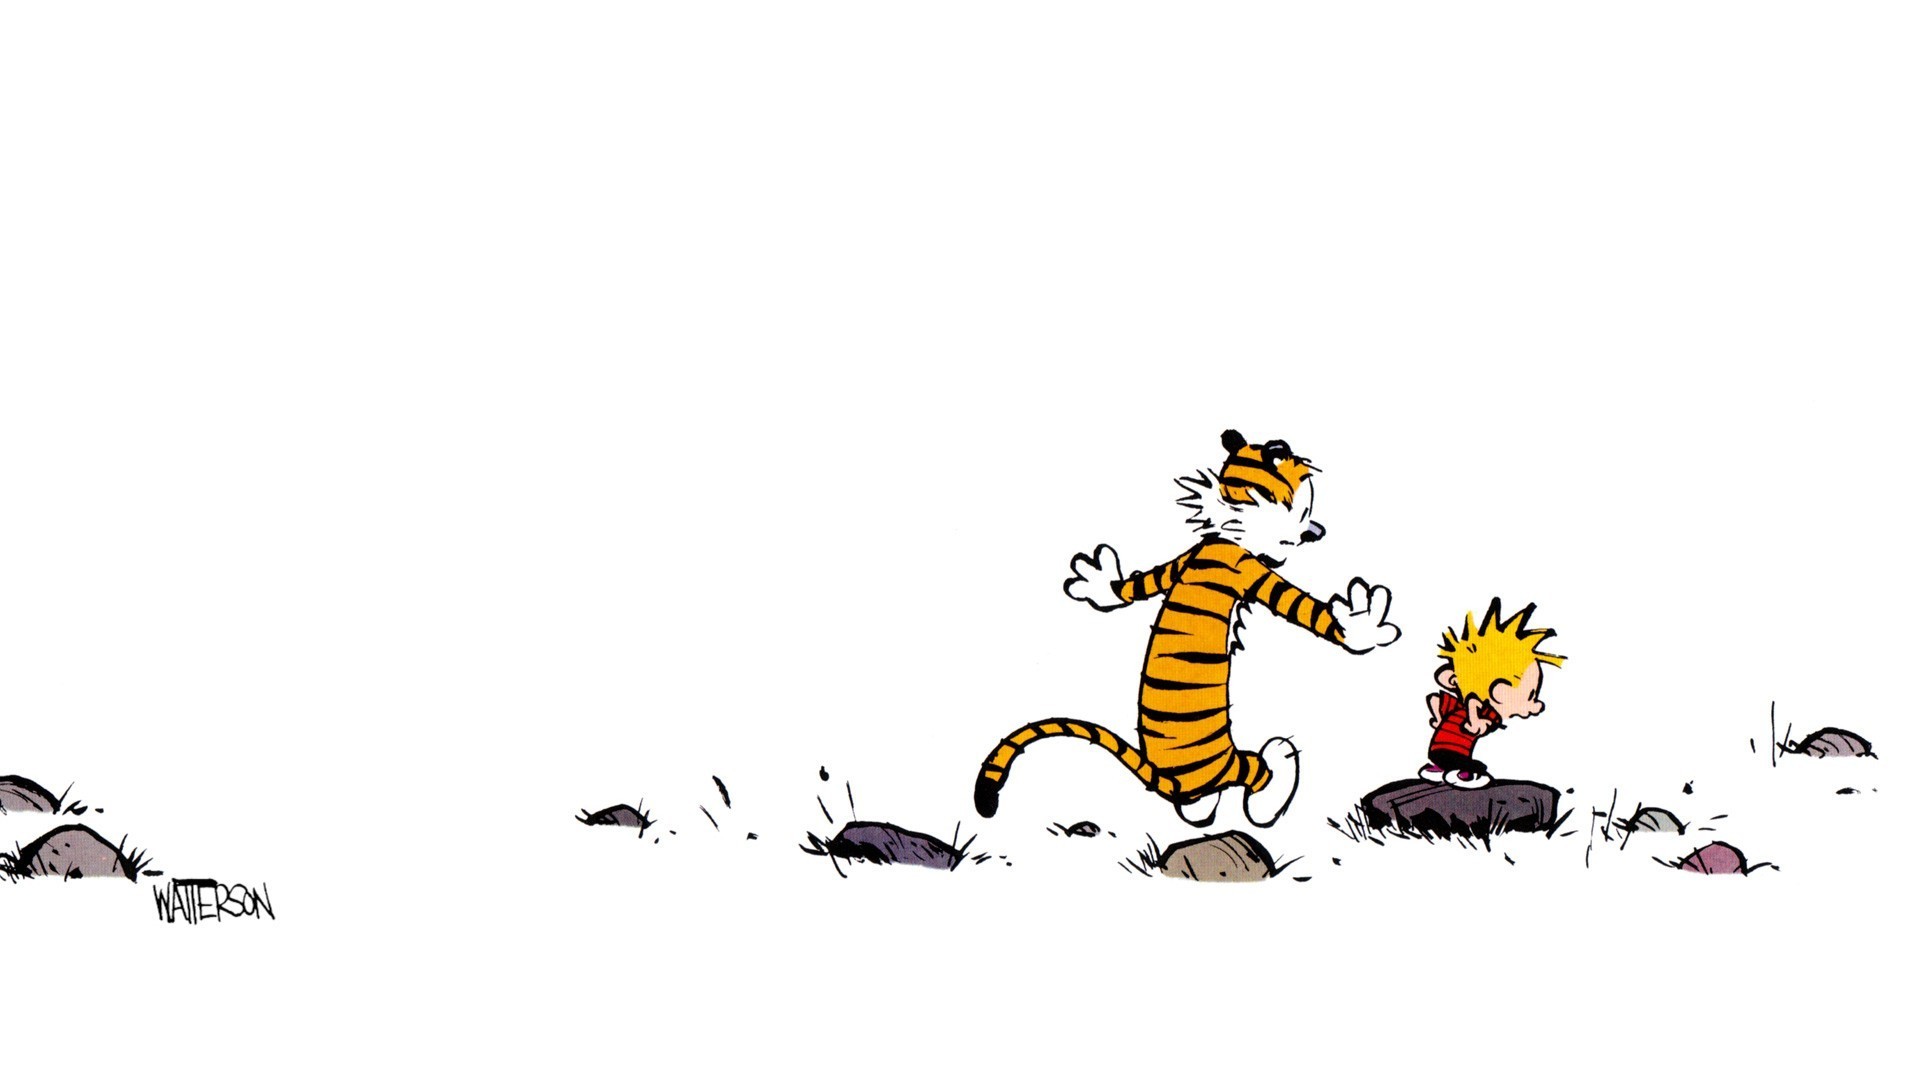 1920x1080 calvin and hobbes wallpaper free for desktop - calvin and hobbes category